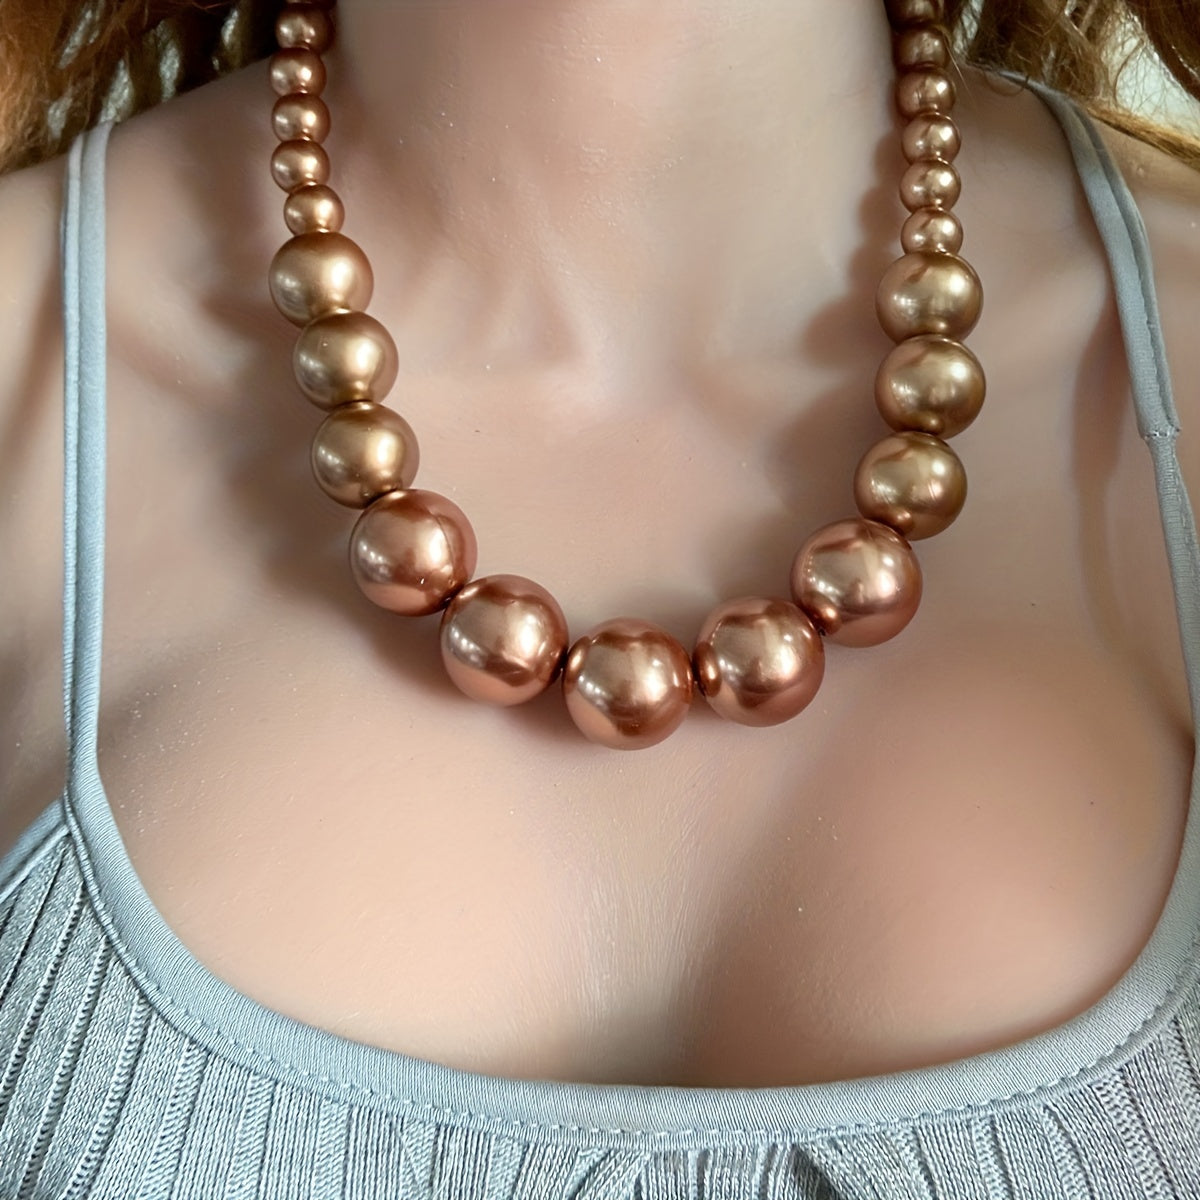 Elegant Faux Pearl Jewelry Set for Women - Perfect Gift for Any Occasion